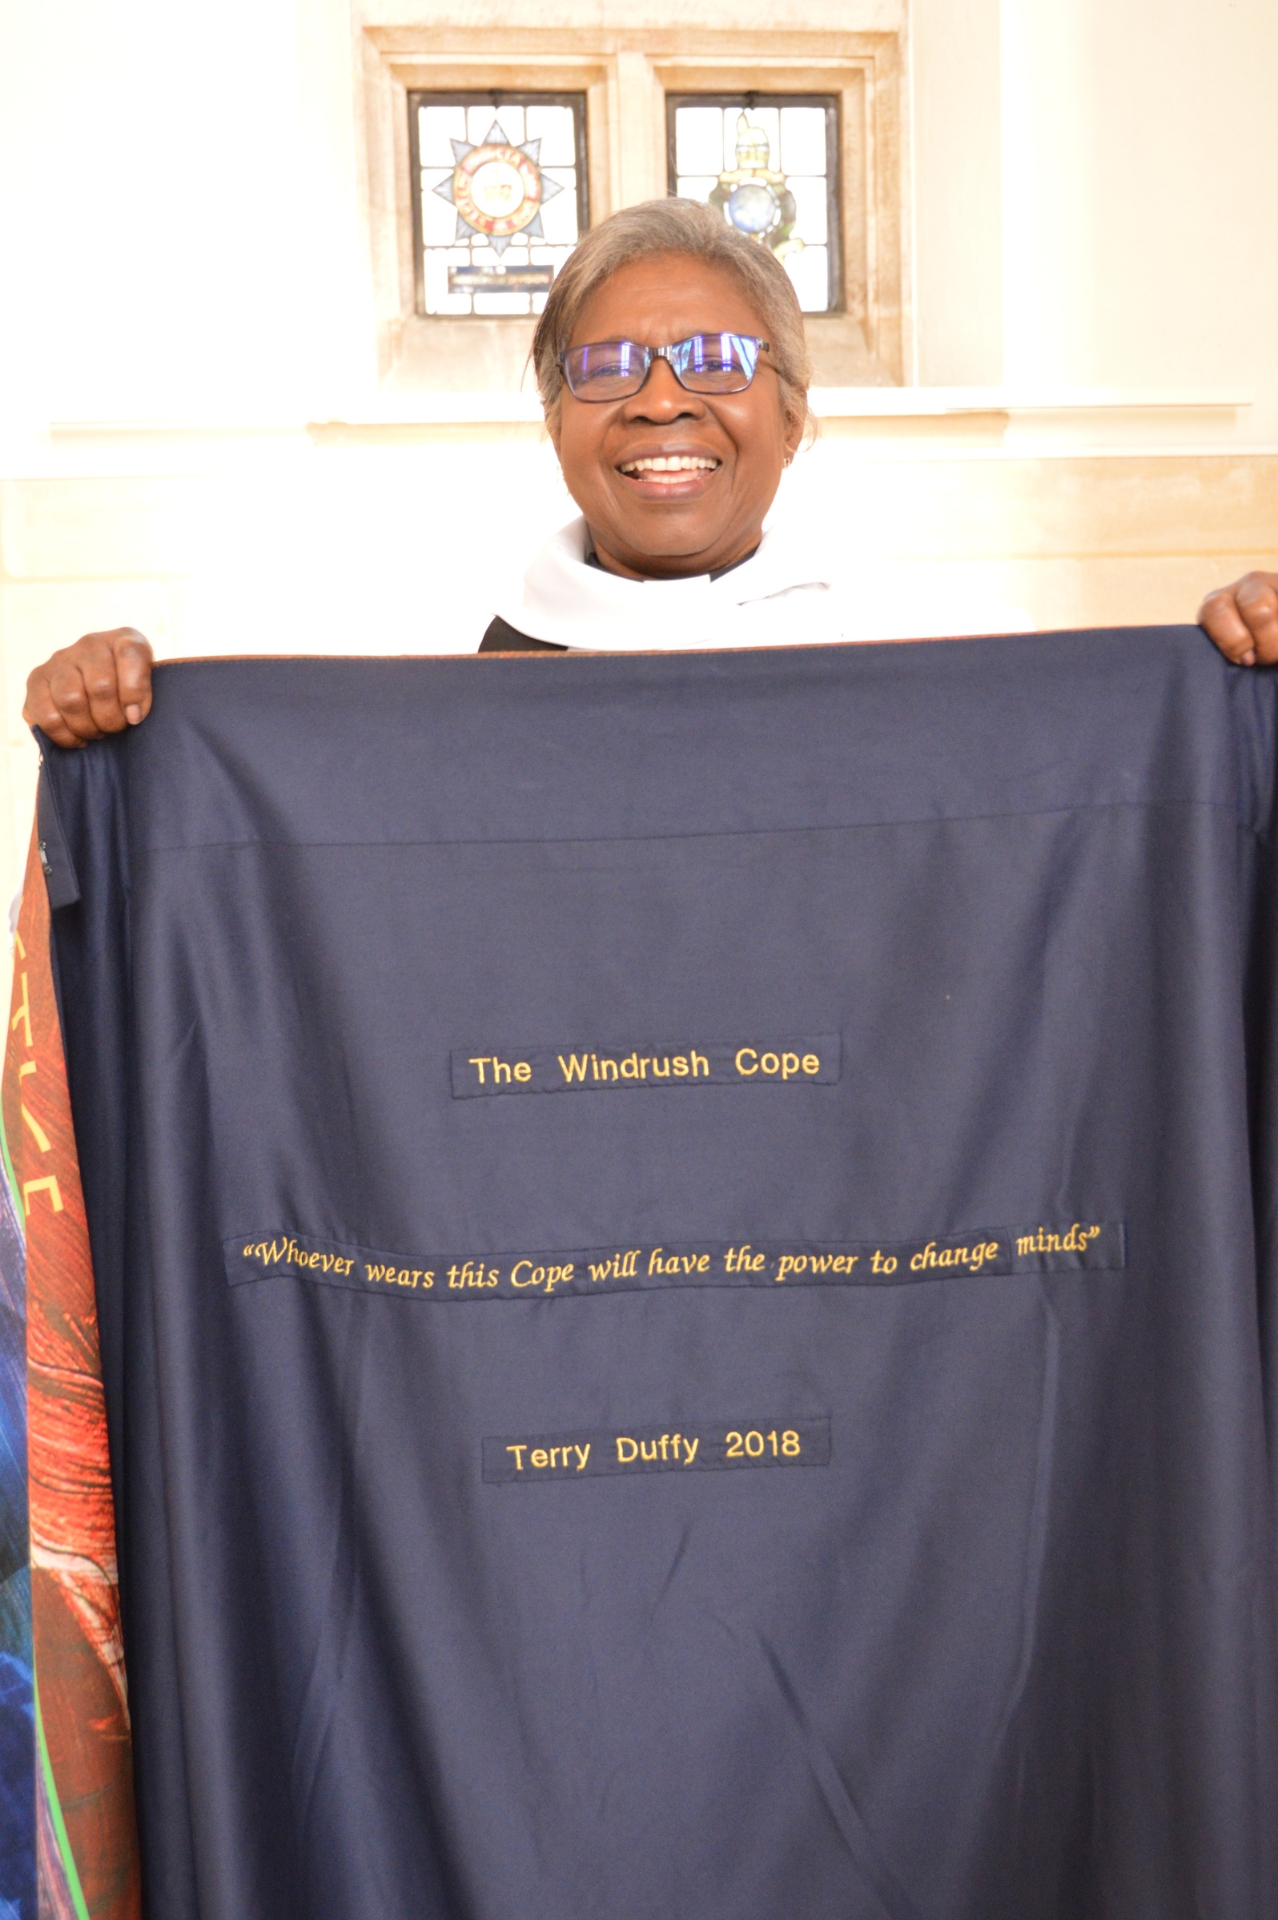 Rev Bev holding up the Windrush Cope which has “Whoever wears this cope will have the power to change minds” embroided on the inside in gold thread on a blue fabric